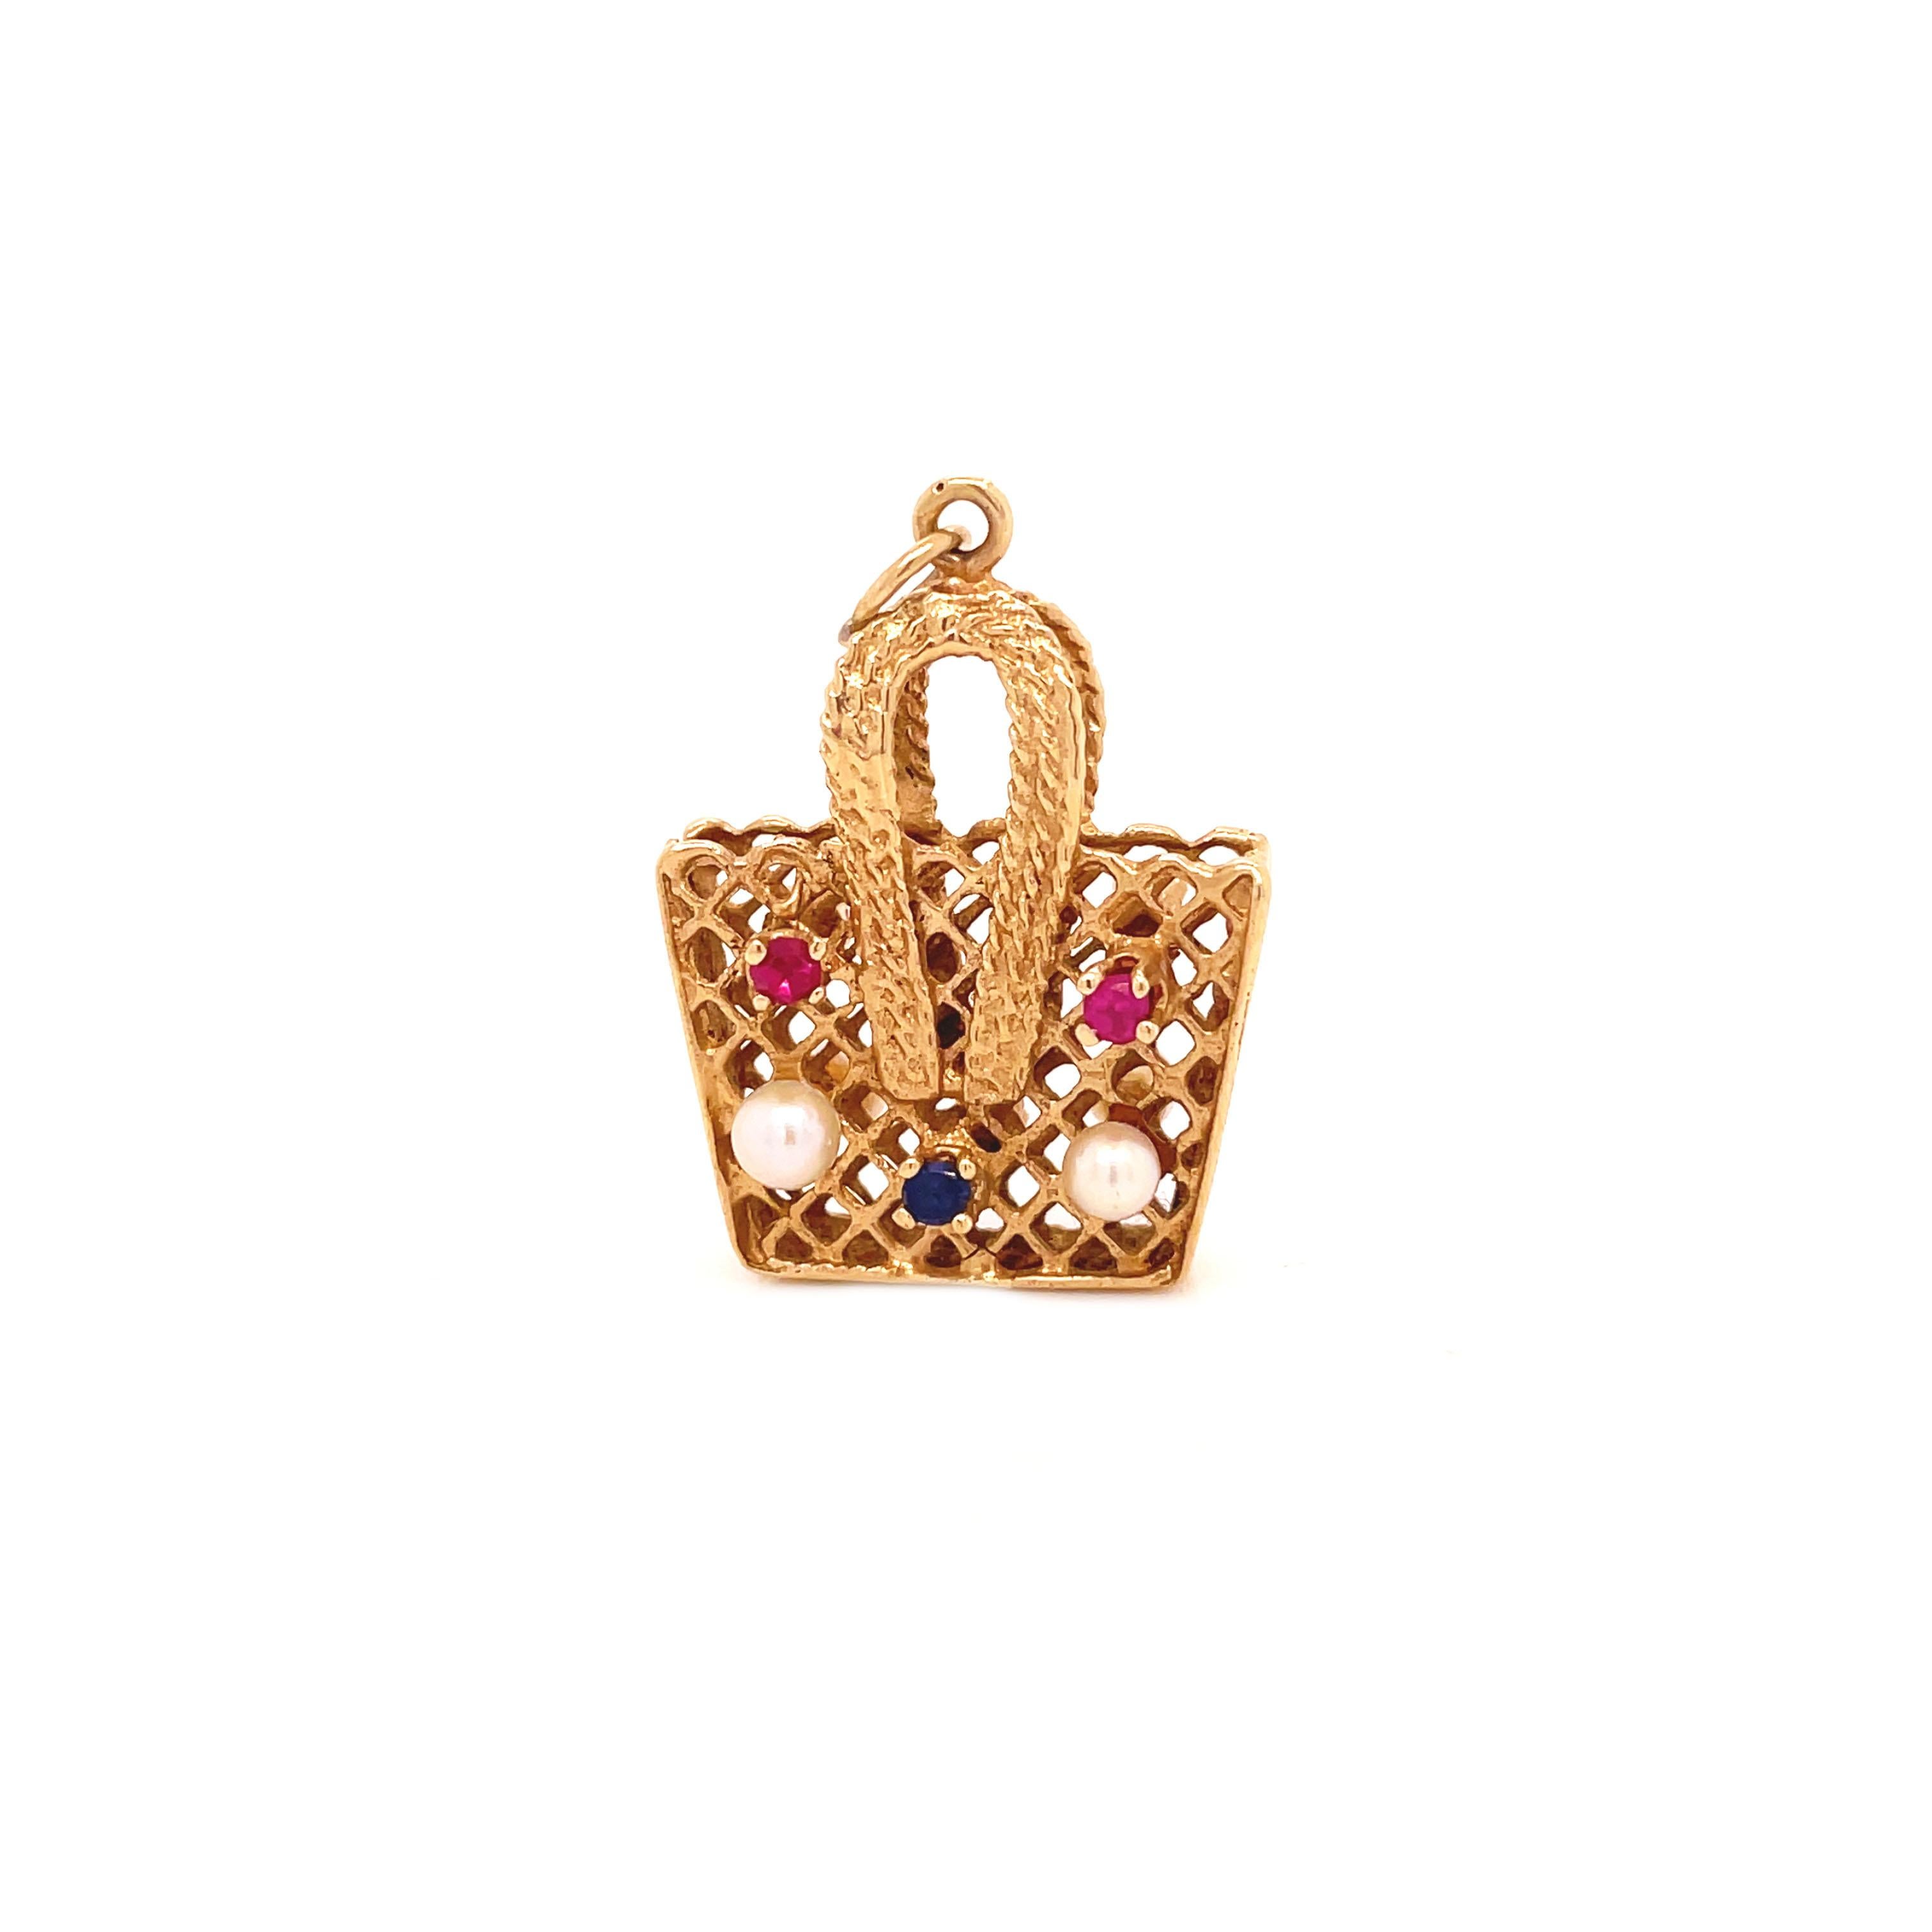 Women's or Men's 1960's Gold Picnic Basket Charm with Pearls, Sapphires, and Rubies